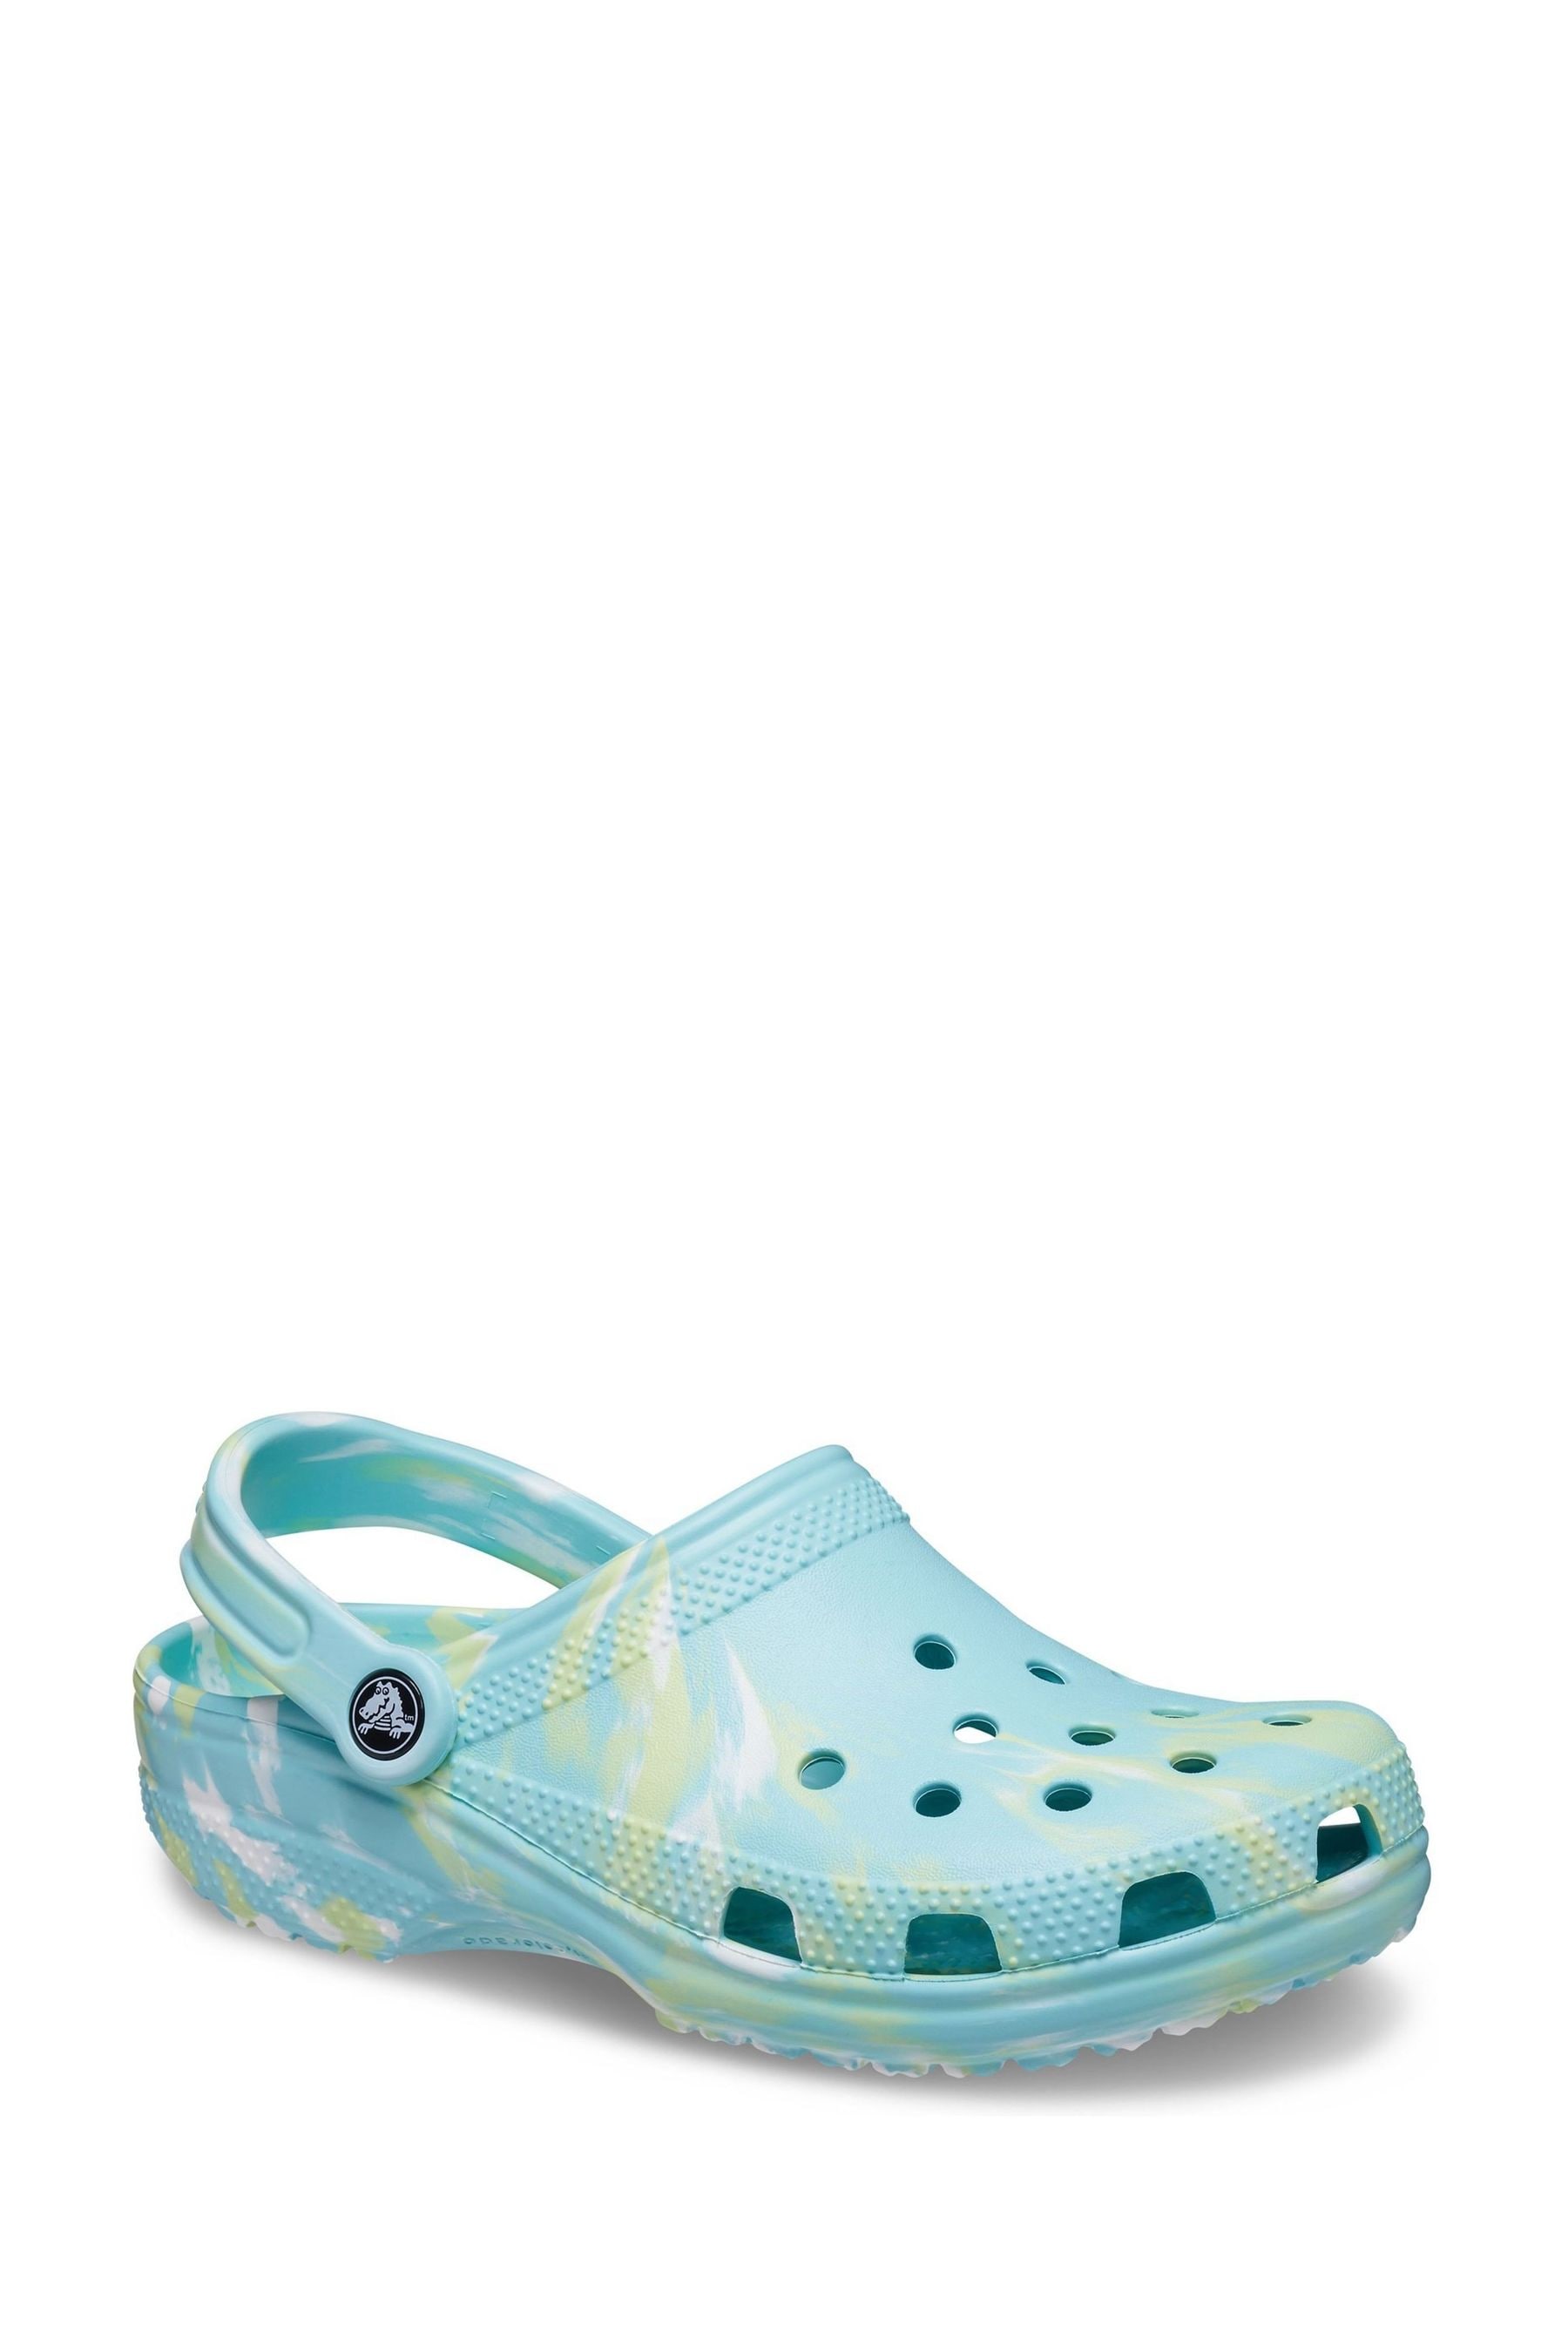 Buy Crocs Blue Marble Sandals from the Next UK online shop